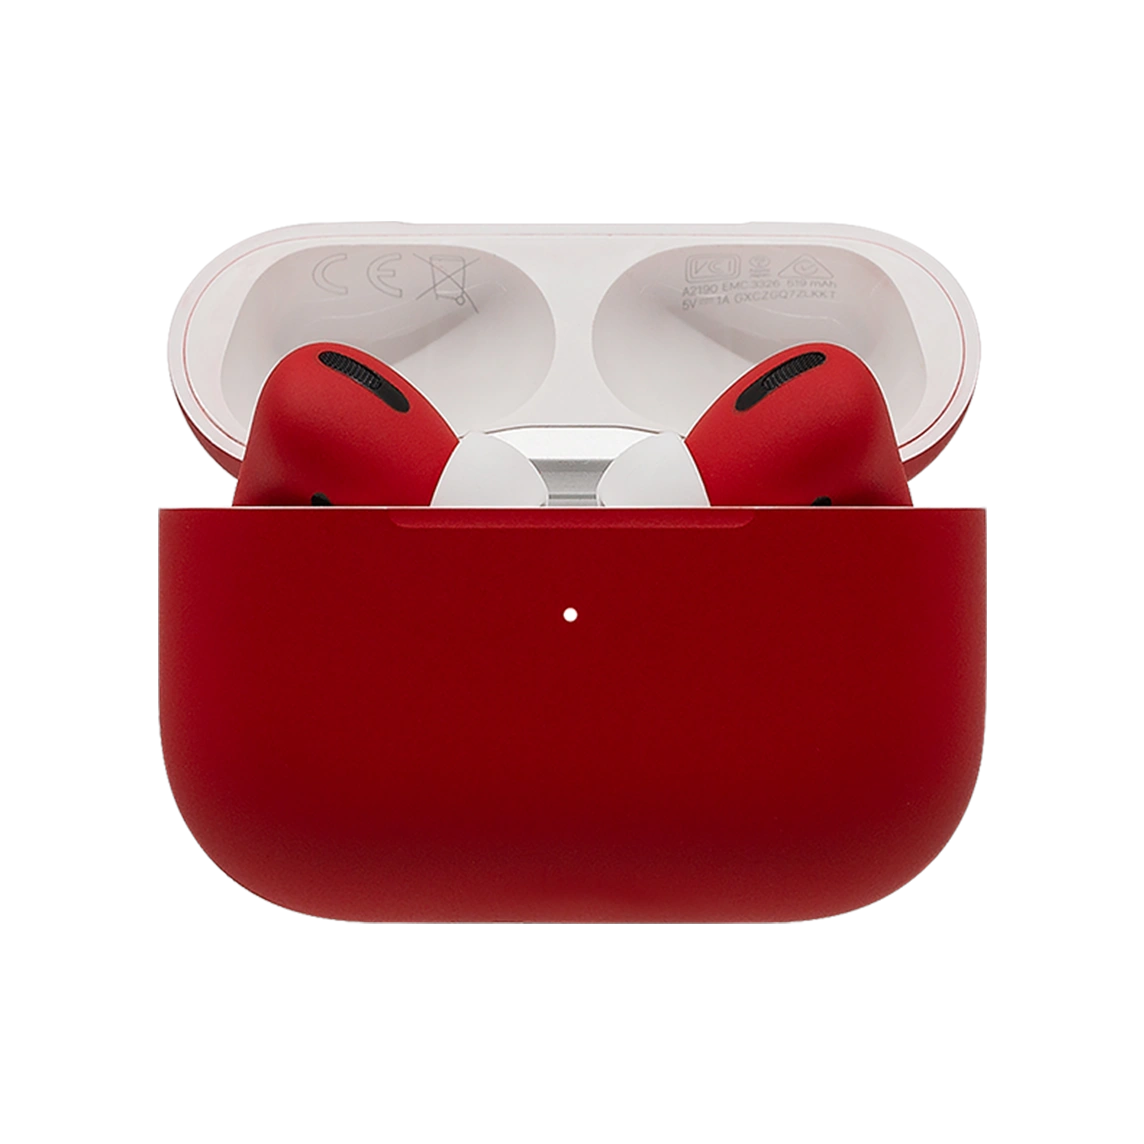 switch-painted-apple-airpods-pro-ferrari-red-matte